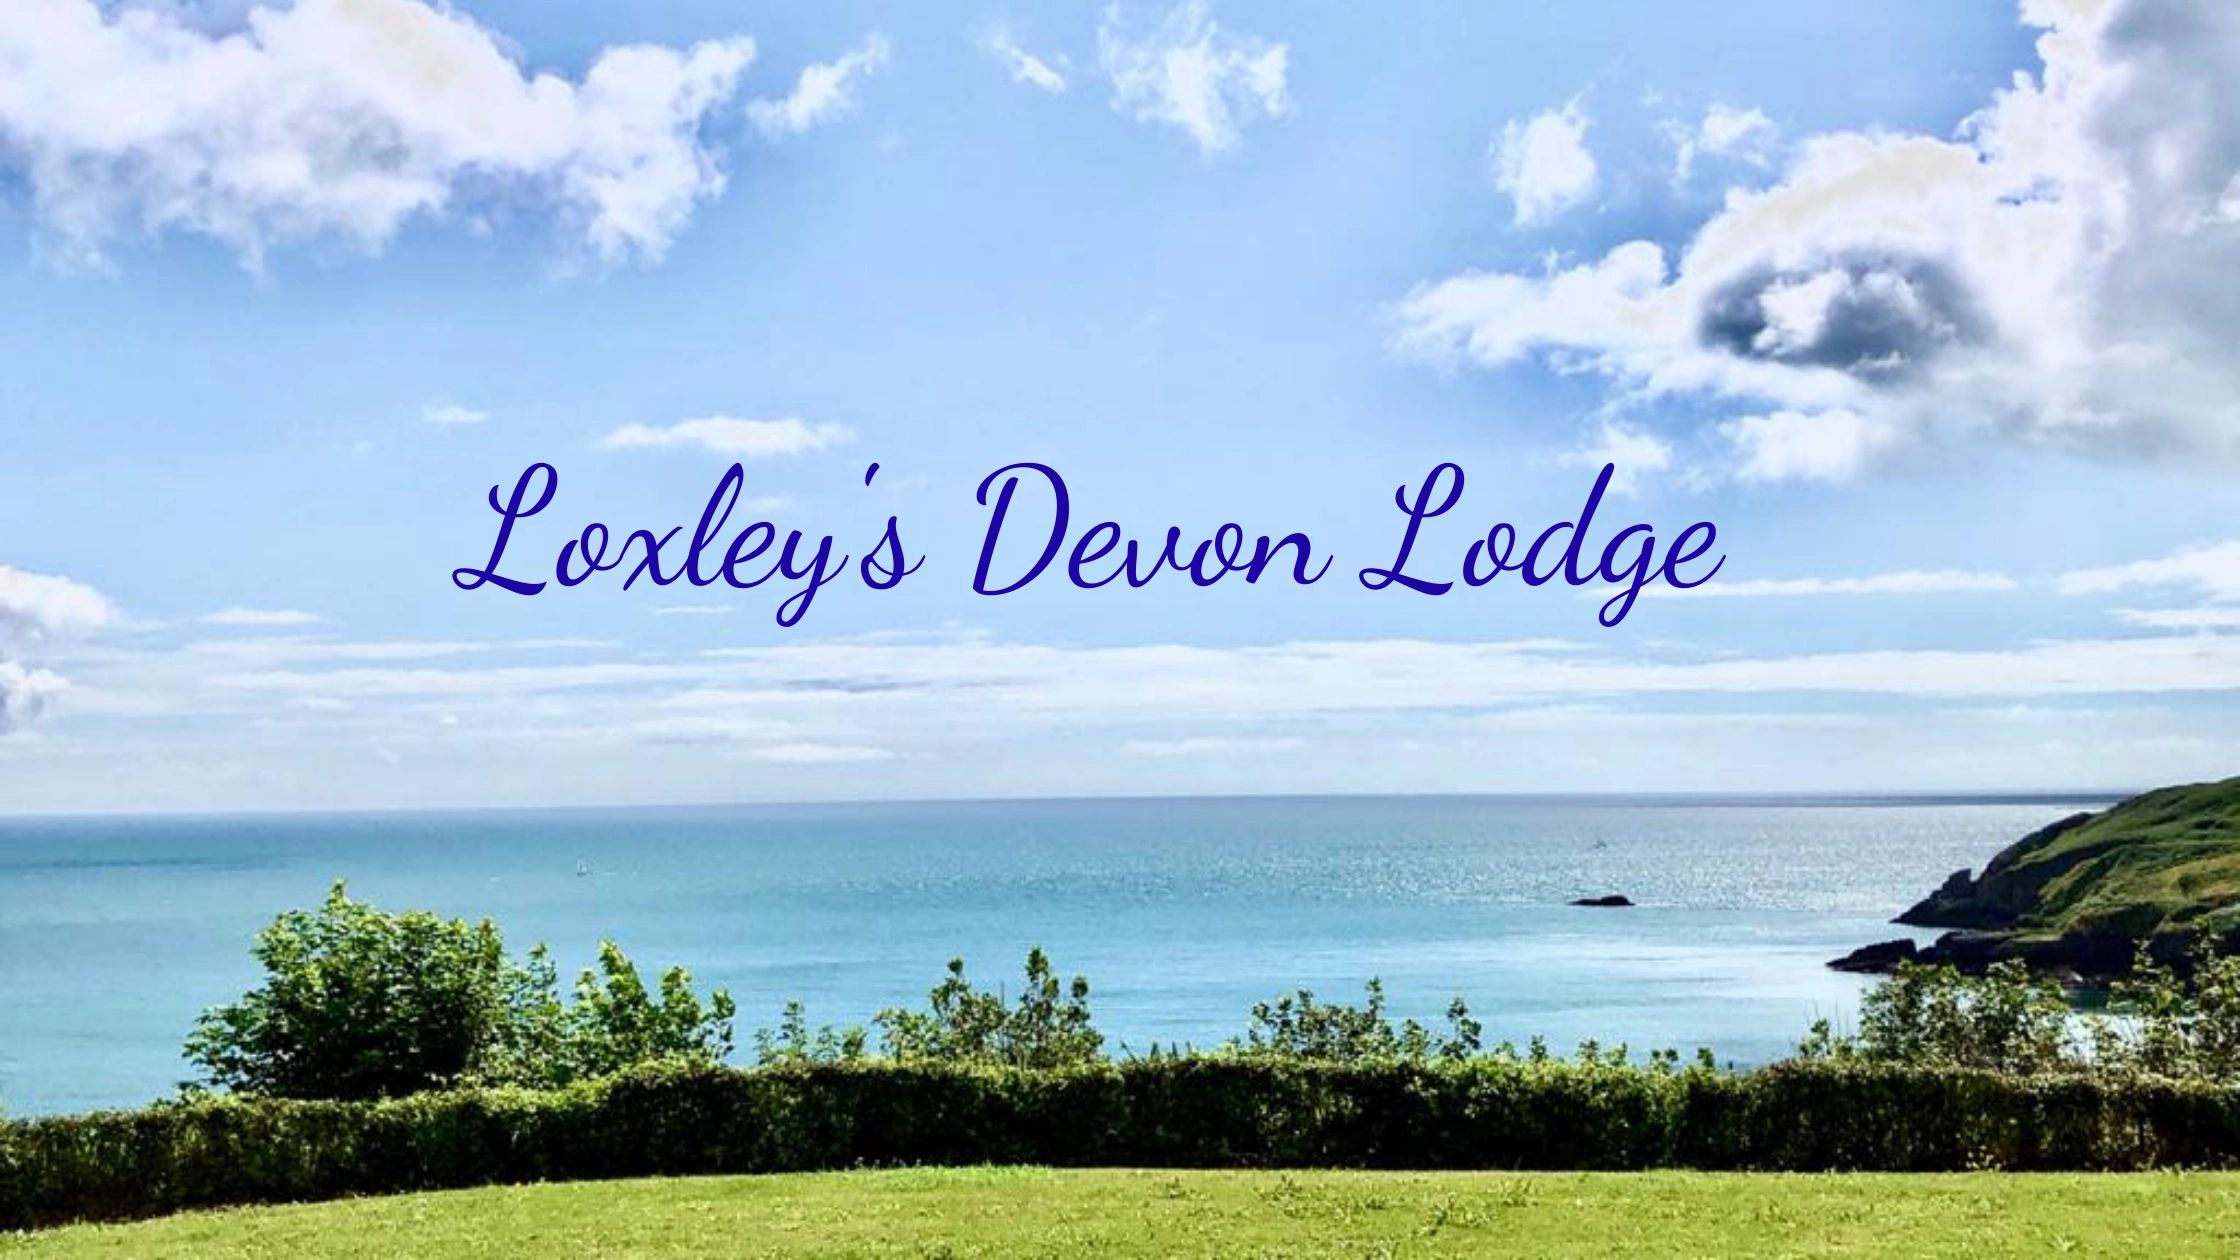 This stunning sea view will greet you every morning when you stay at Loxley's Devon Lodge